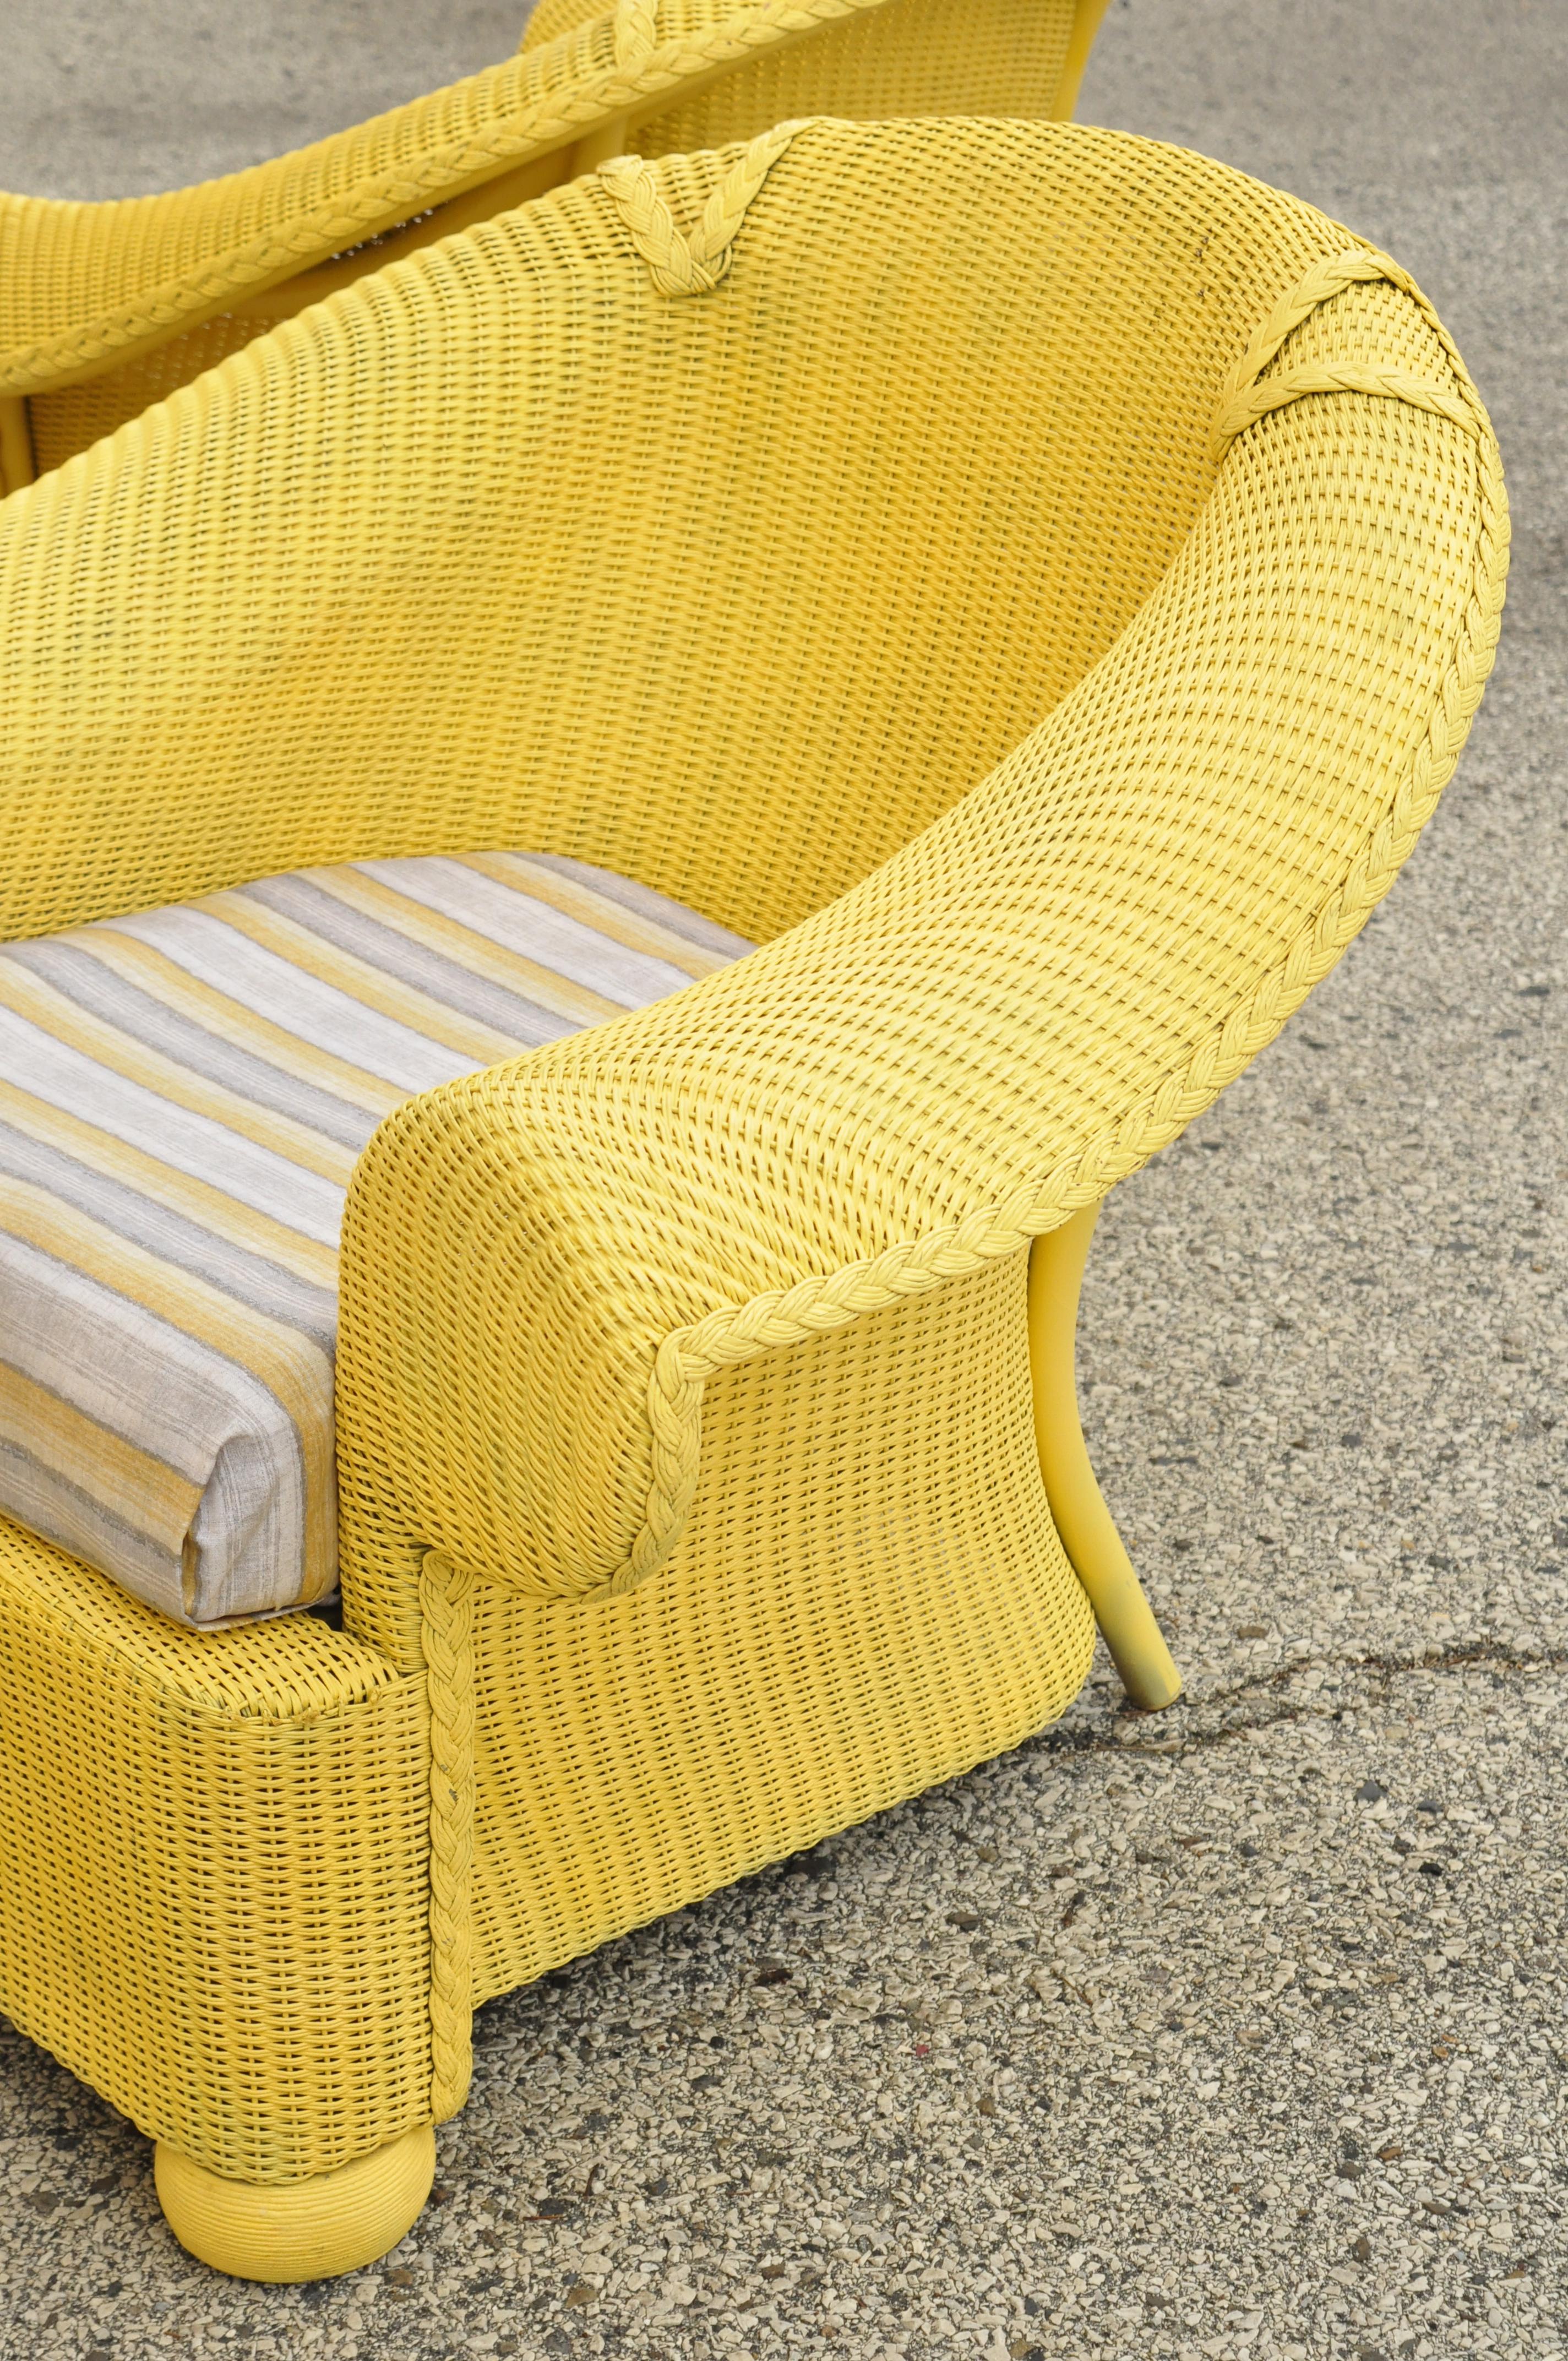 North American Lloyd Flanders Loom Yellow Wicker Large Oversize Sunroom Lounge Chairs, a Pair